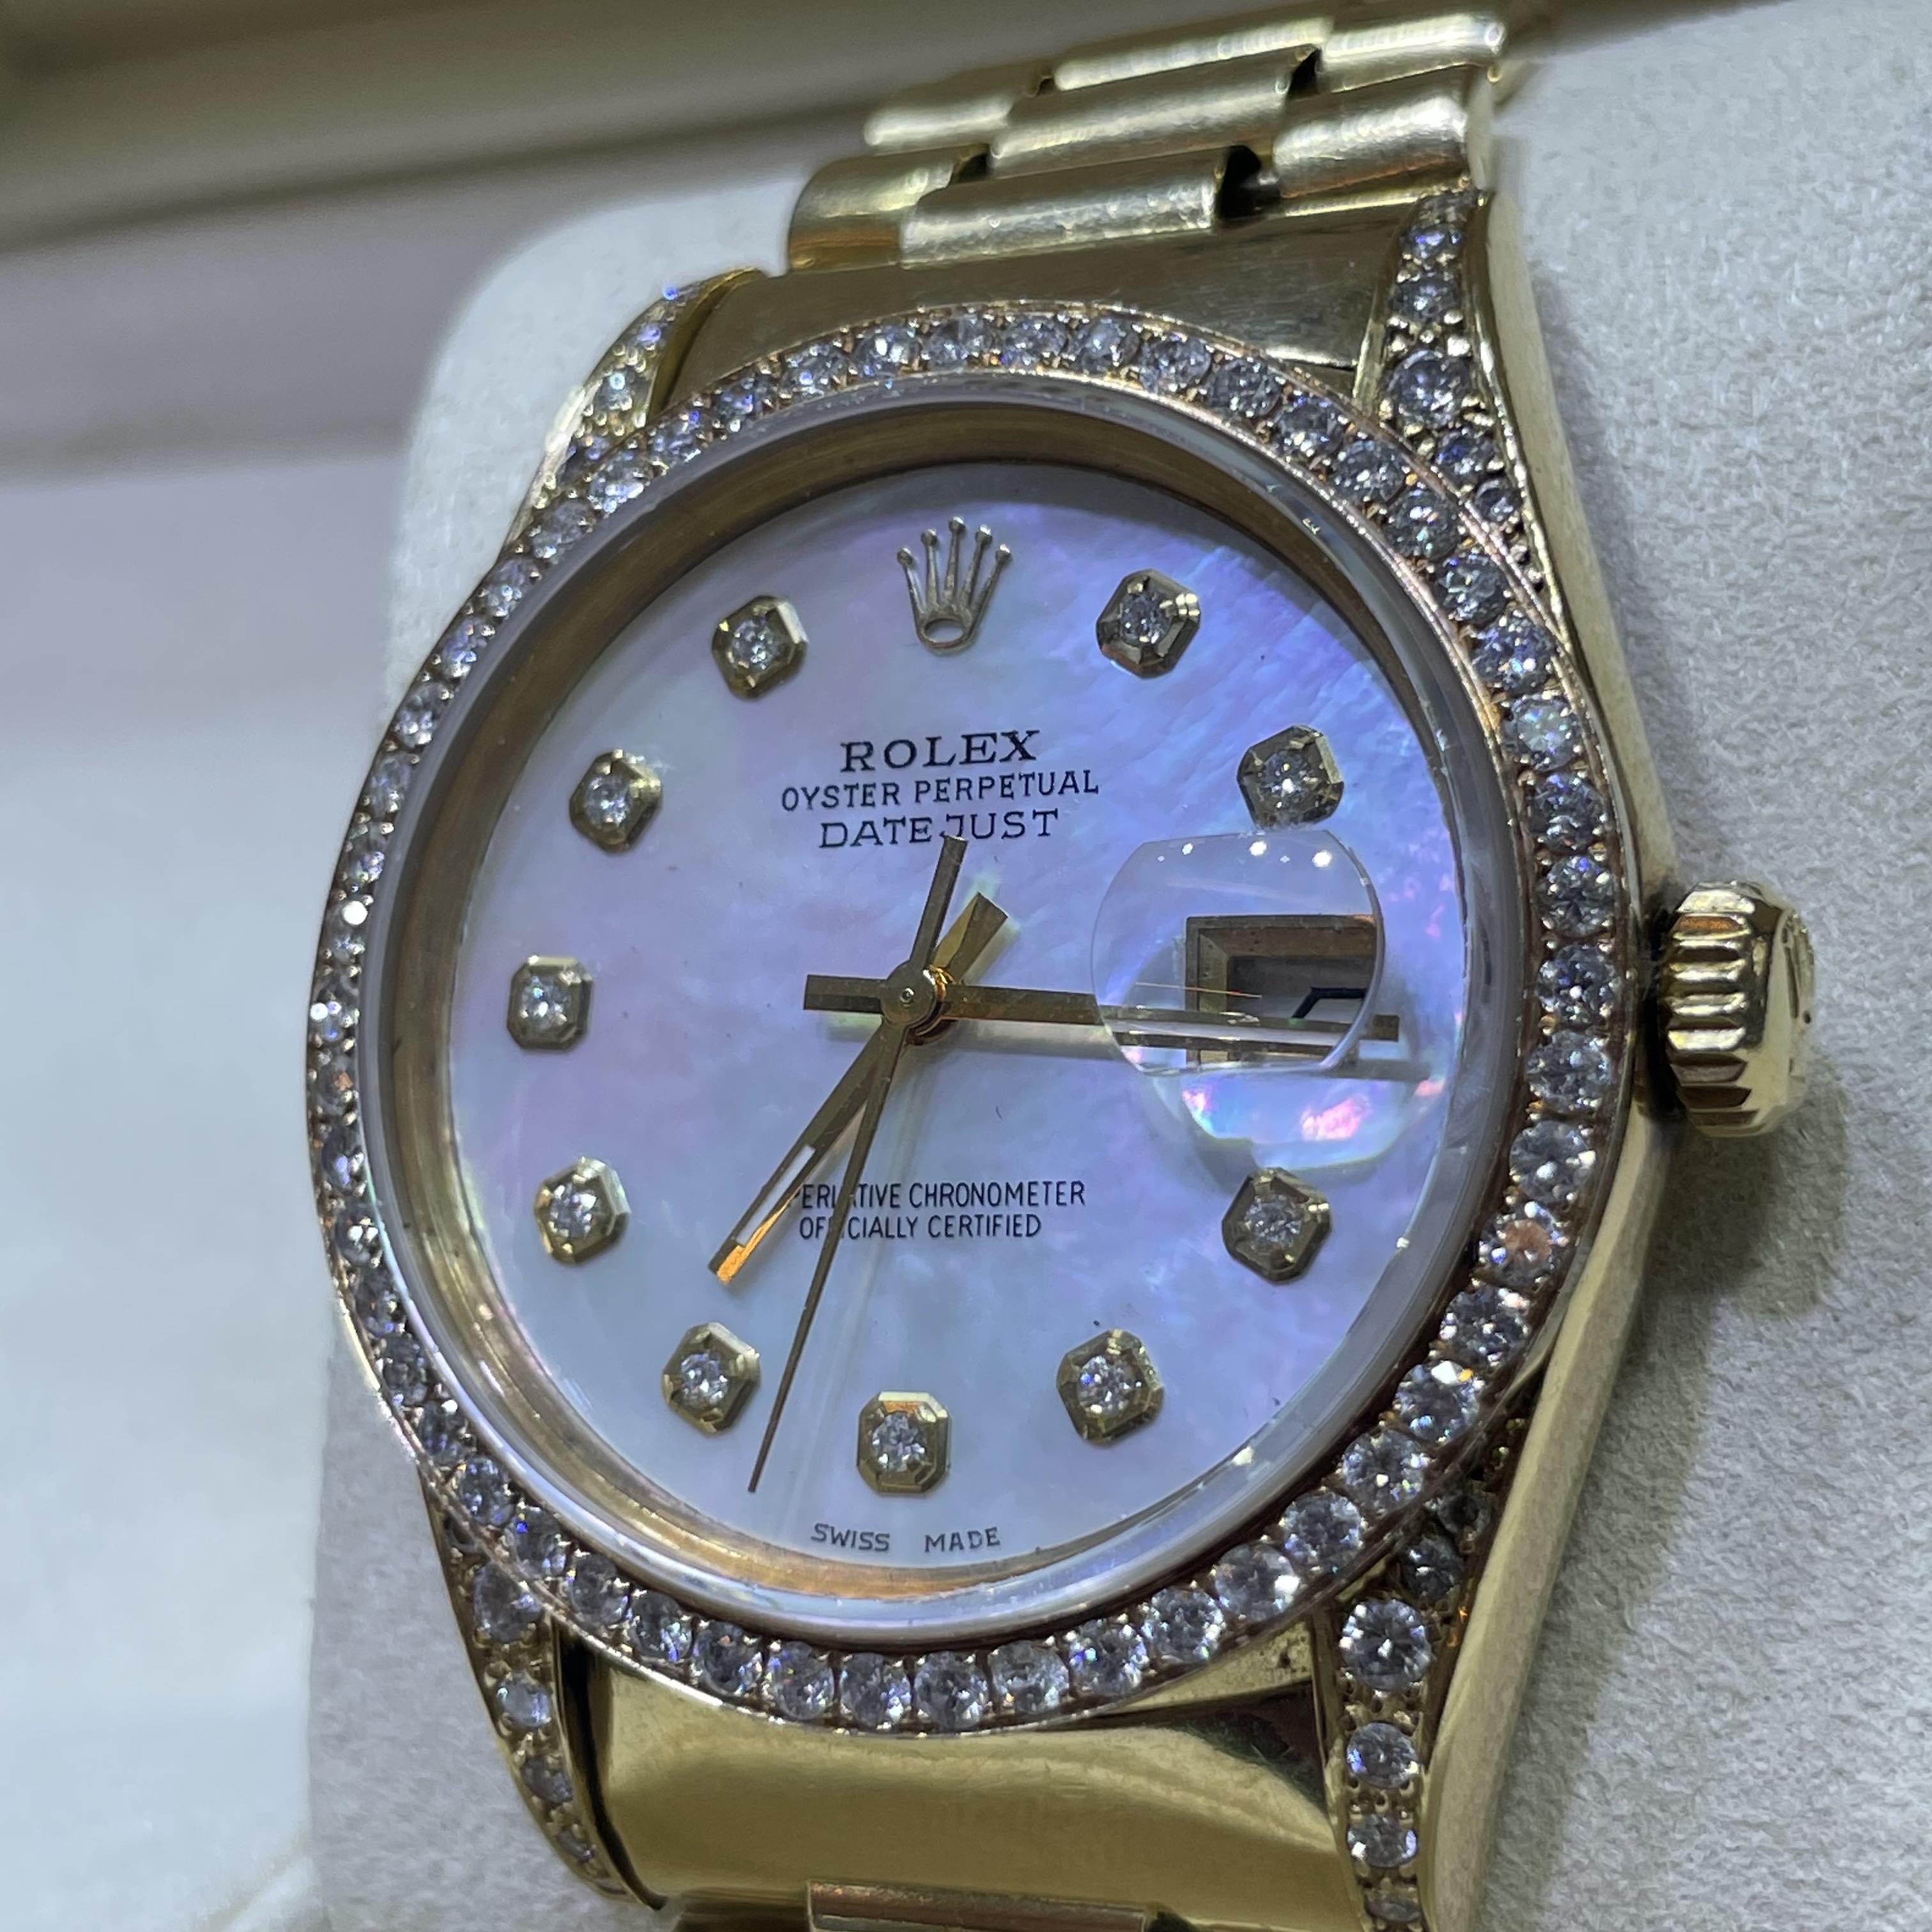 Embrace Elegance with Rose Gold Rolex Watches at RDP Miami Beach Jewelry